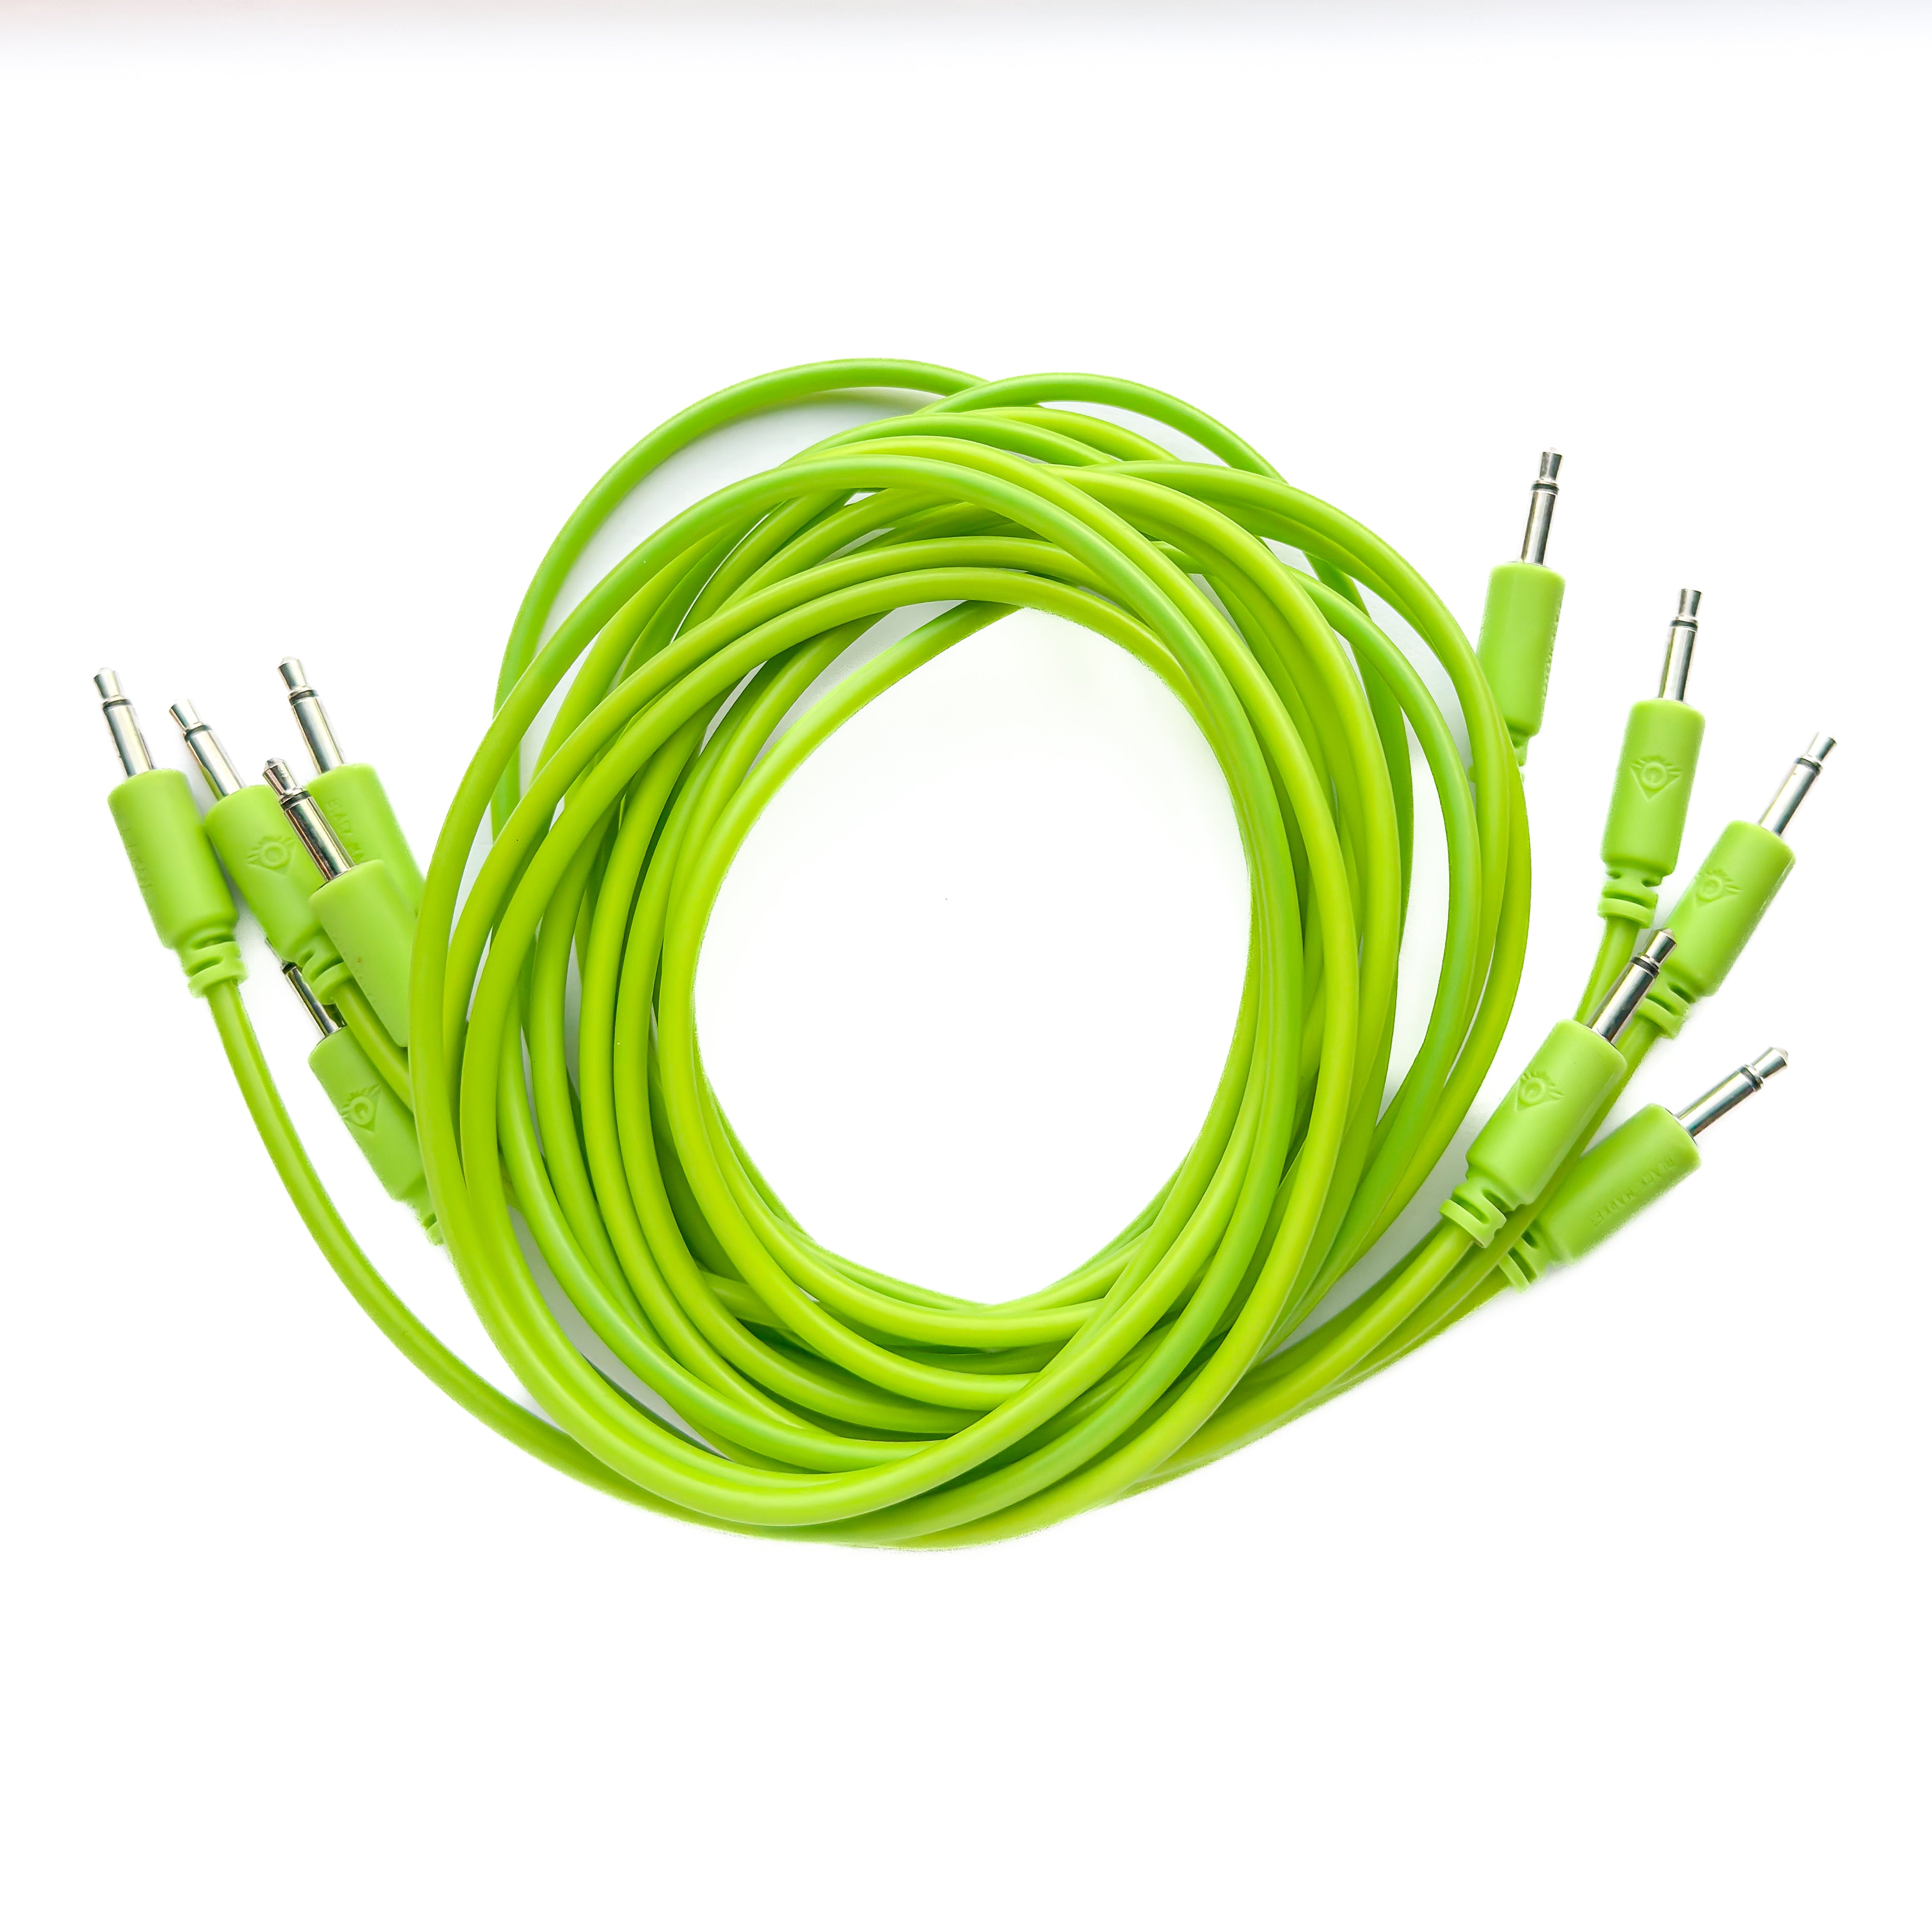 Black Market Modular 3.5mm Patch Cable 5-Pack - 100cm/40" - Glow in the Dark View 1